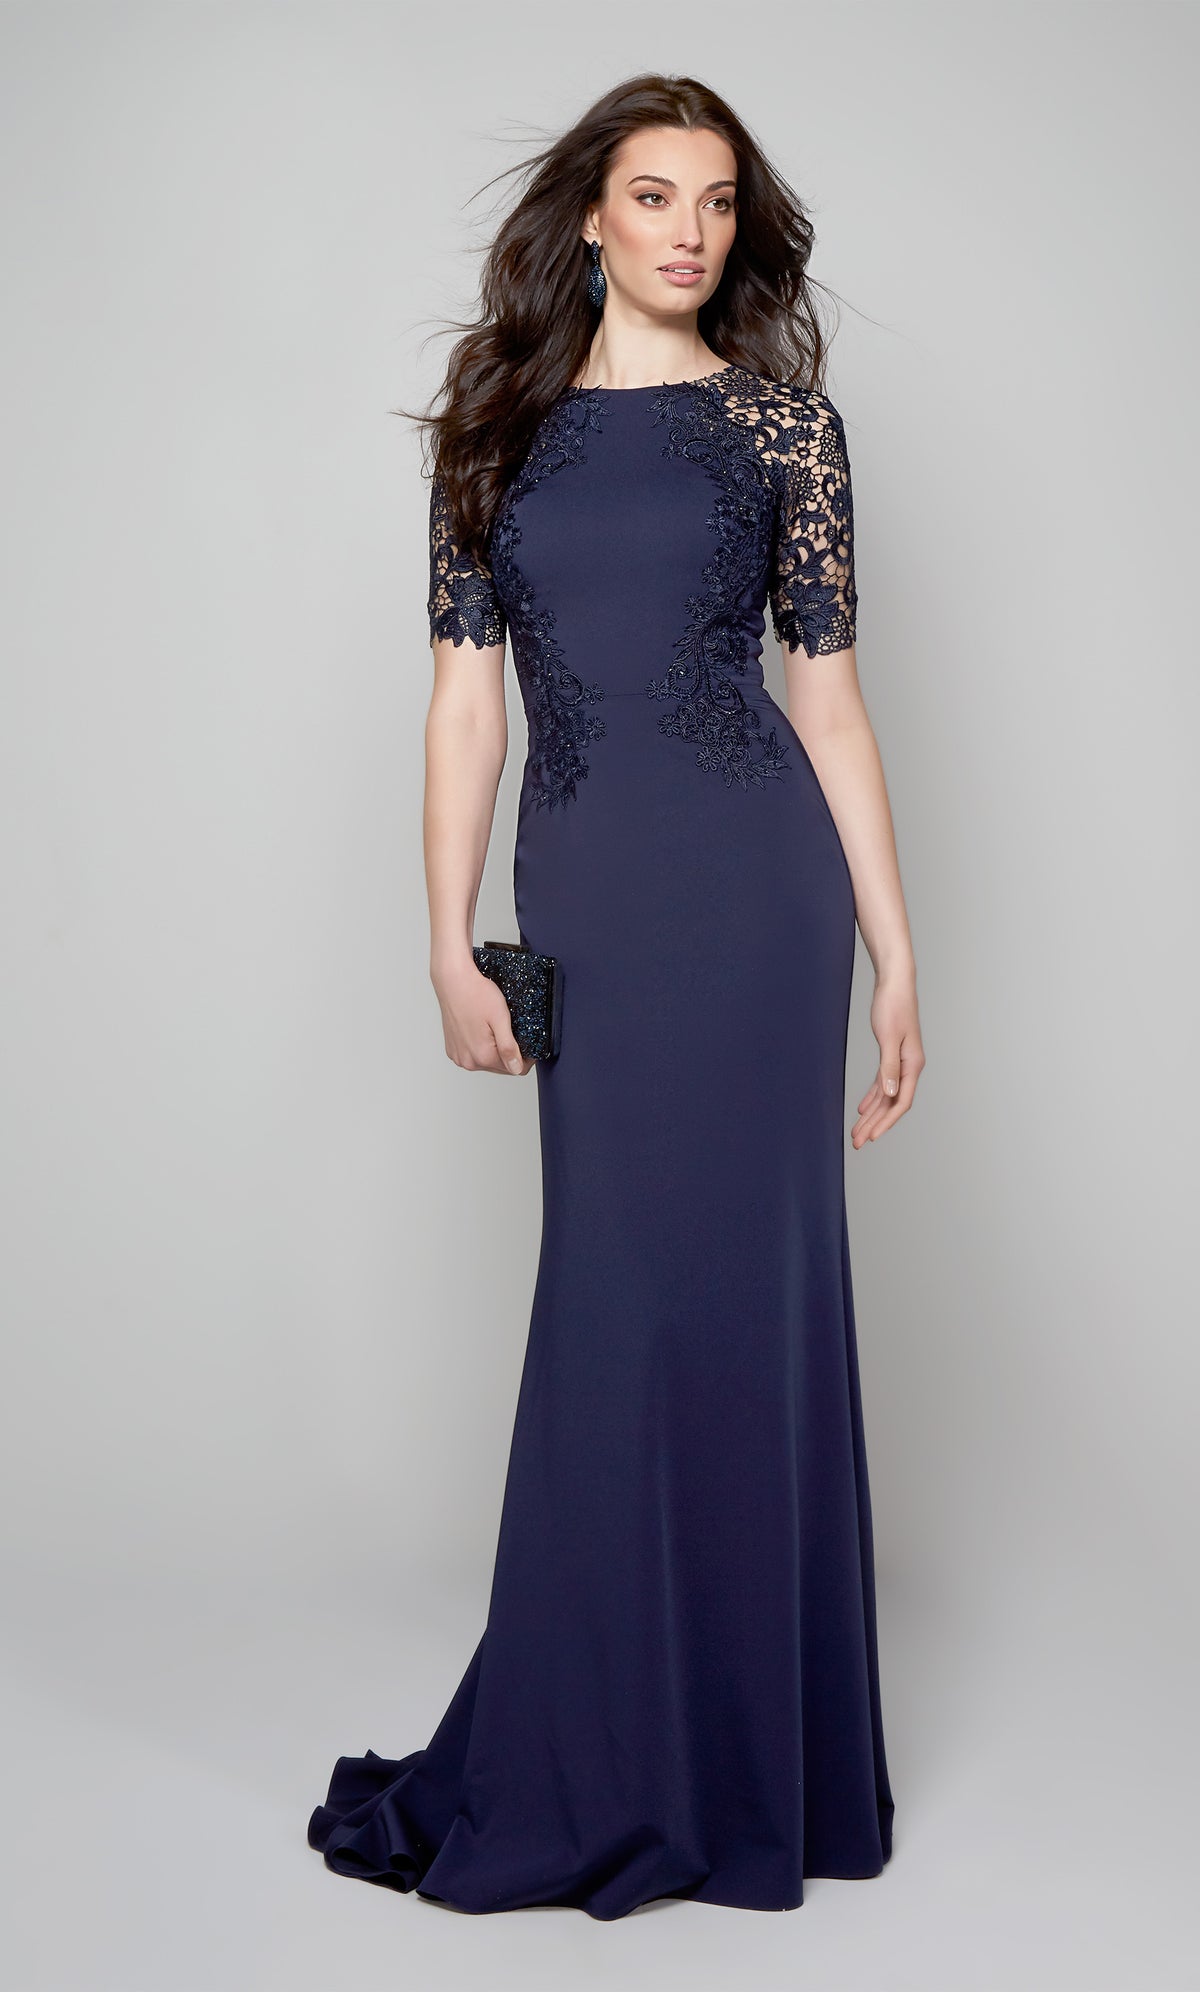 Midnight blue evening gown with short sleeves and lace detail.